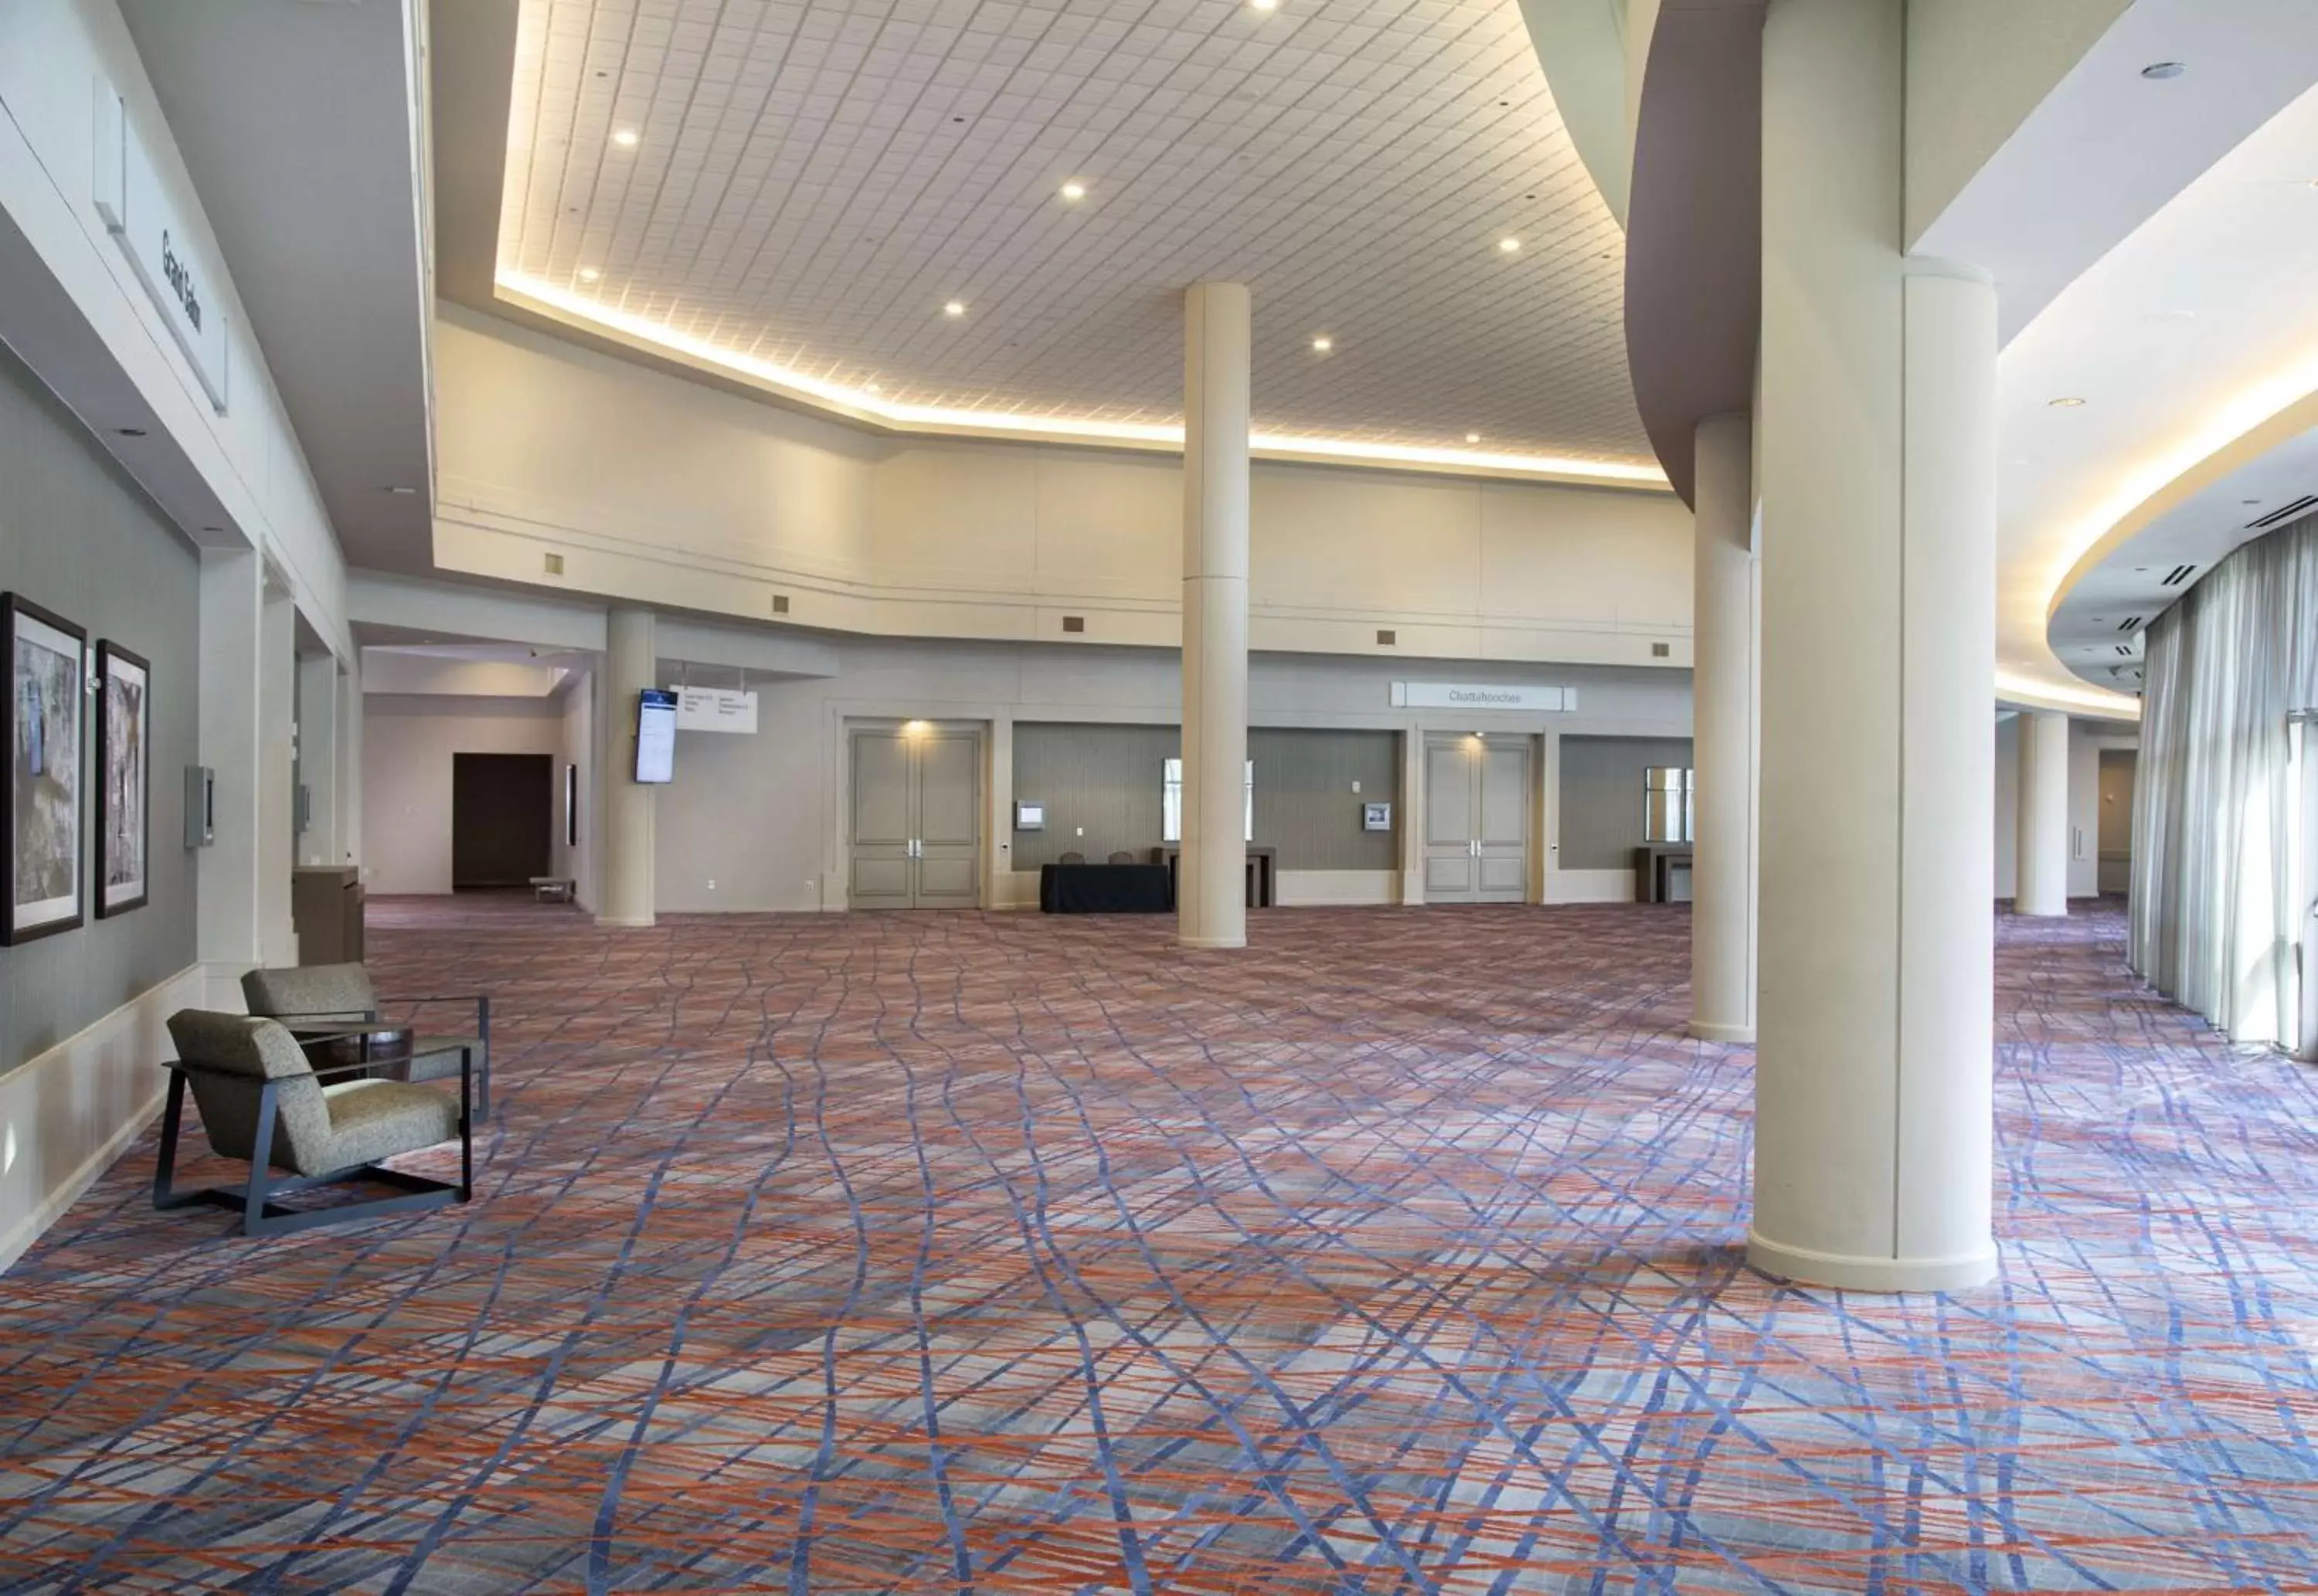 Meeting/conference room, Lobby/Reception in Hilton Atlanta Airport